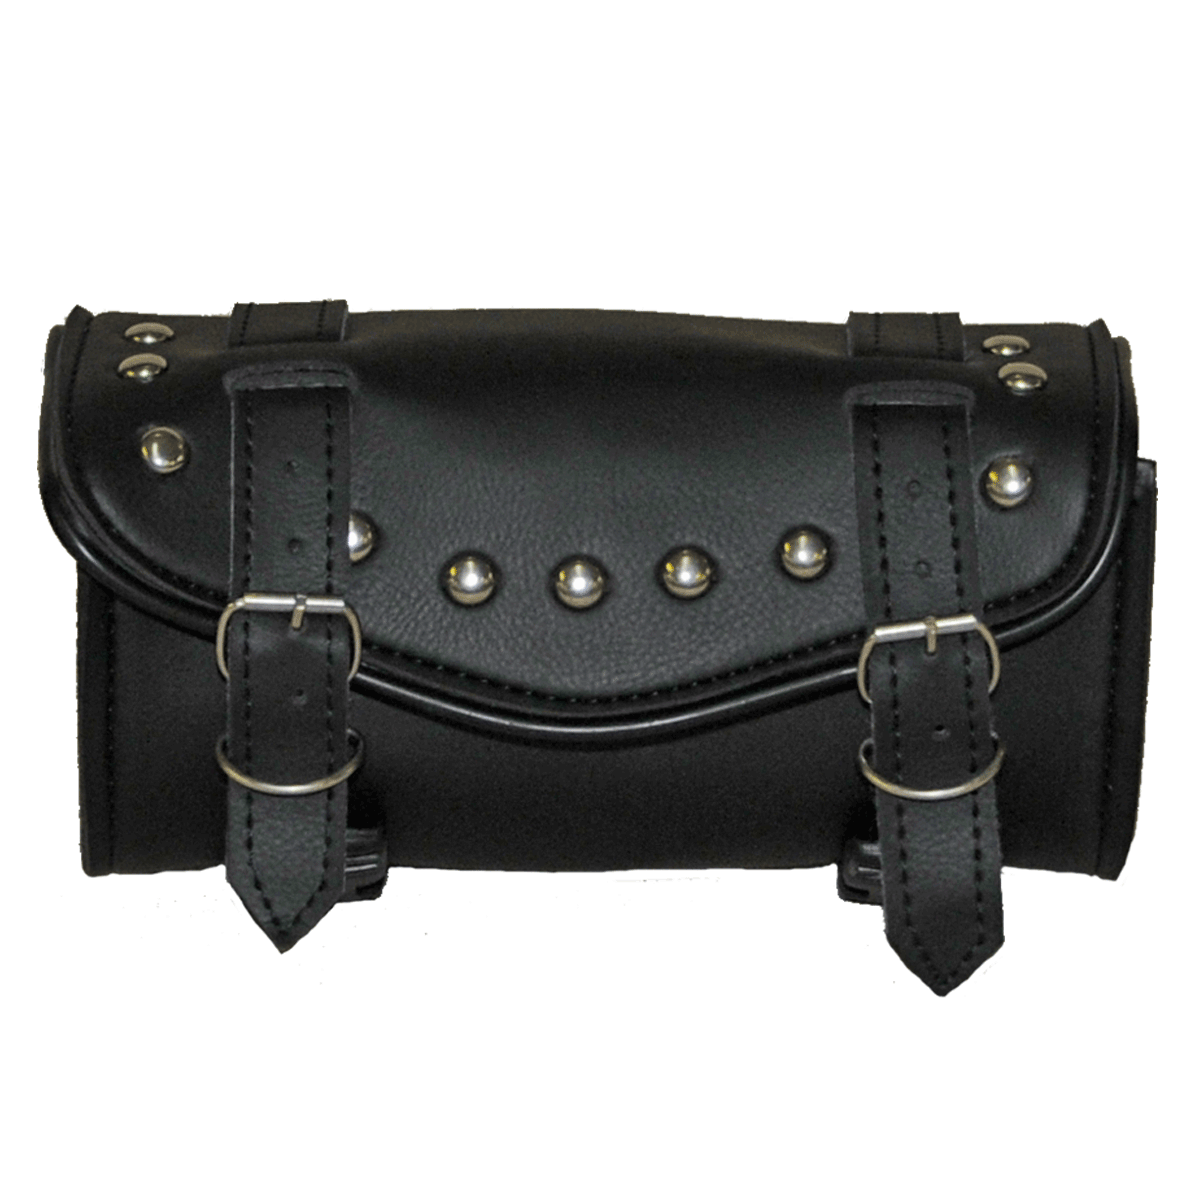 VS103H Hard Shell 2 Strap Studded Tool Bag with V-Shaped Flap